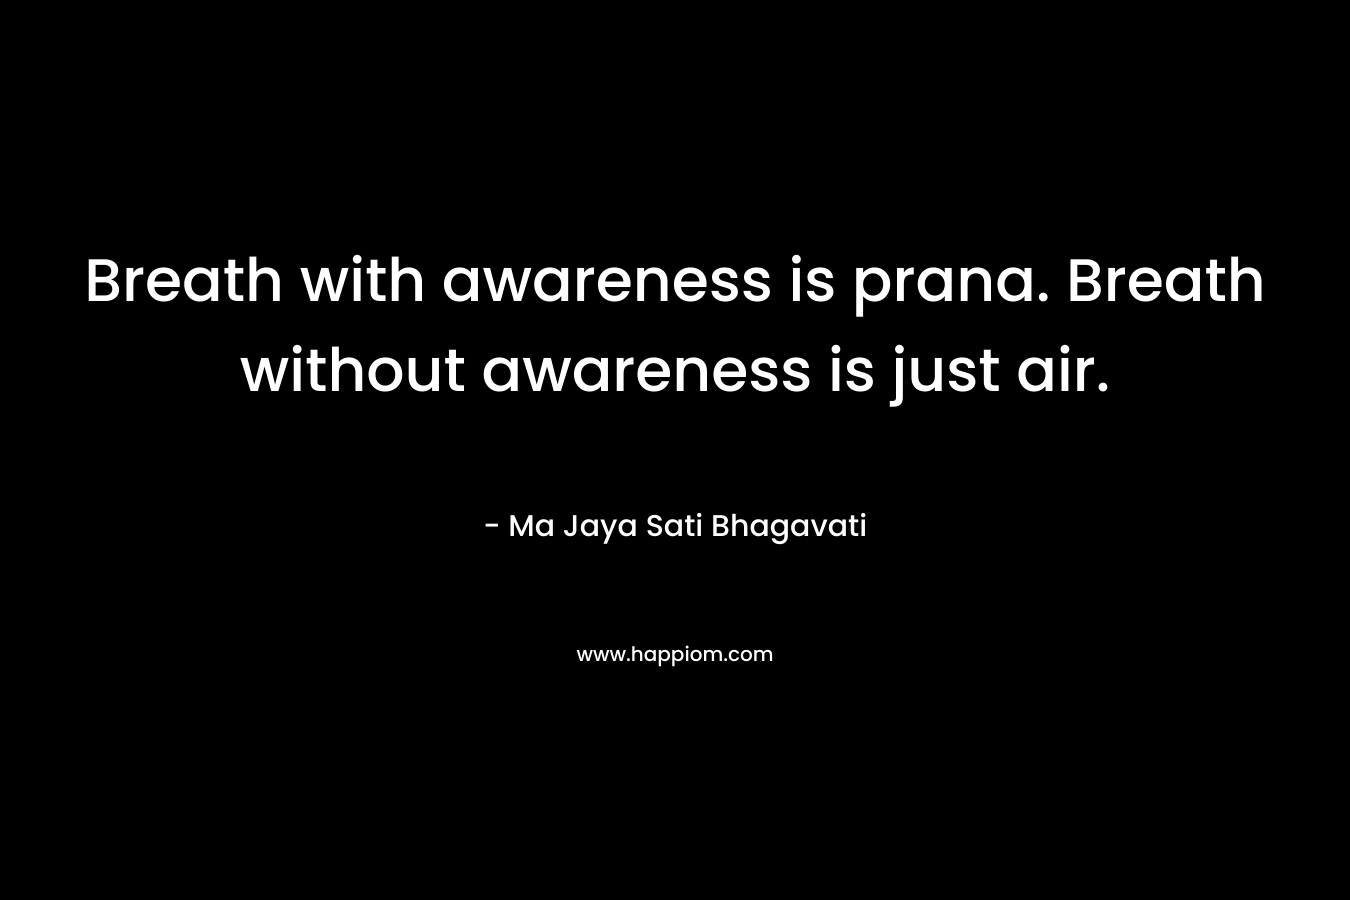 Breath with awareness is prana. Breath without awareness is just air.